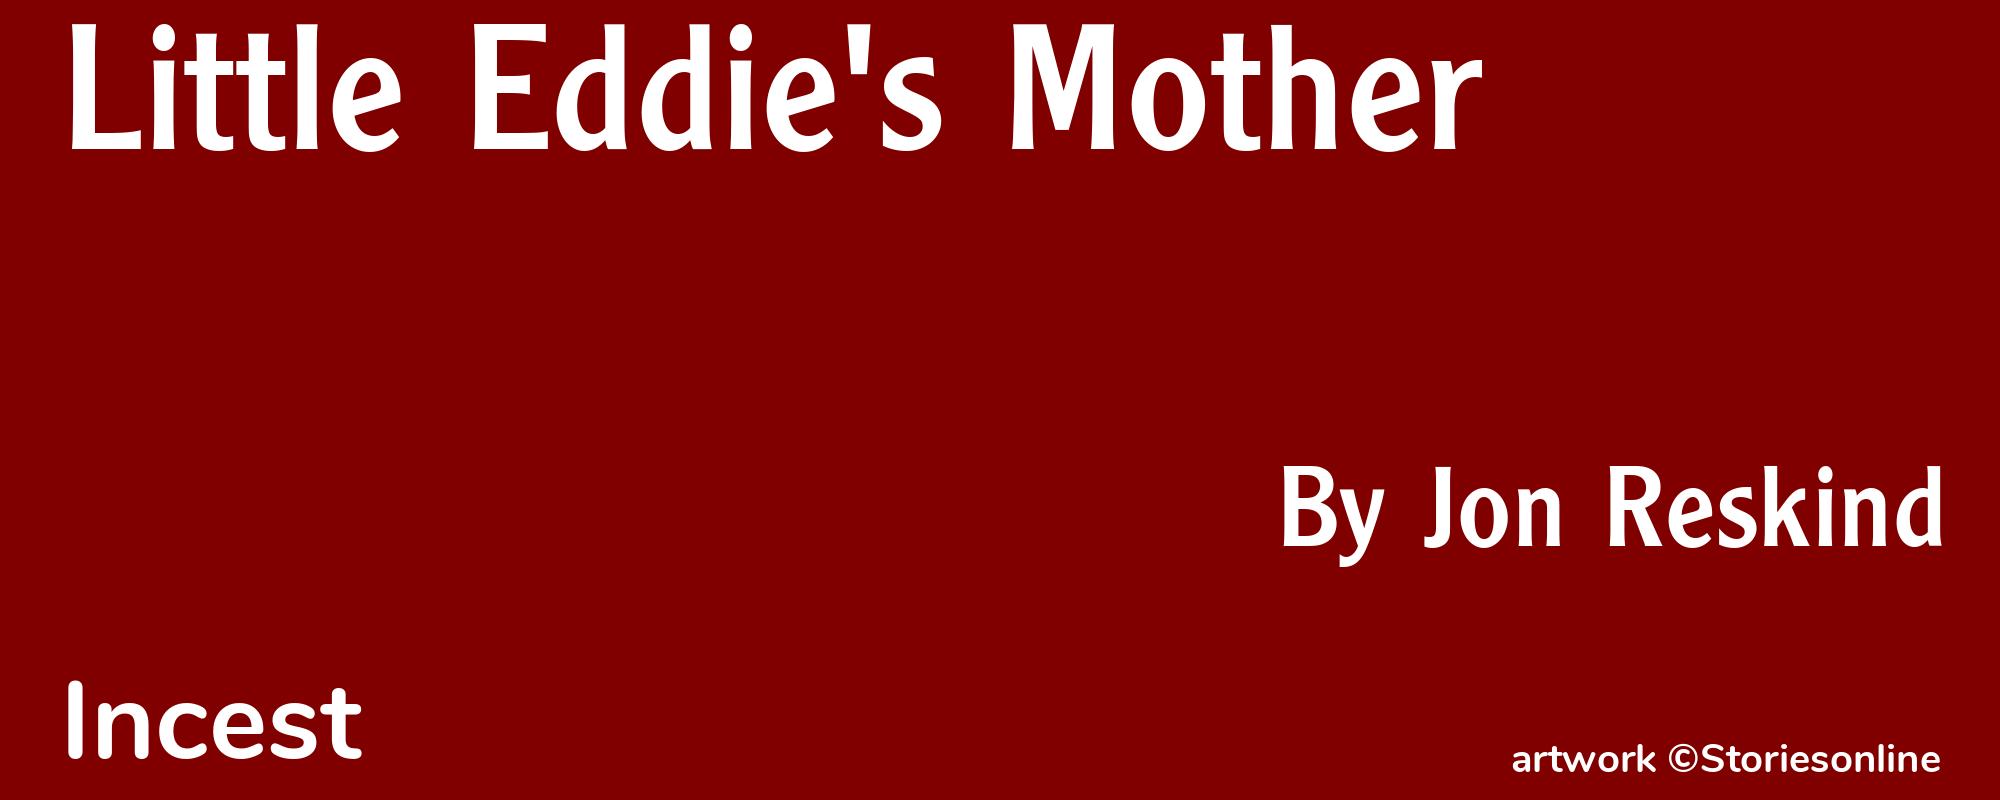 Little Eddie's Mother - Cover